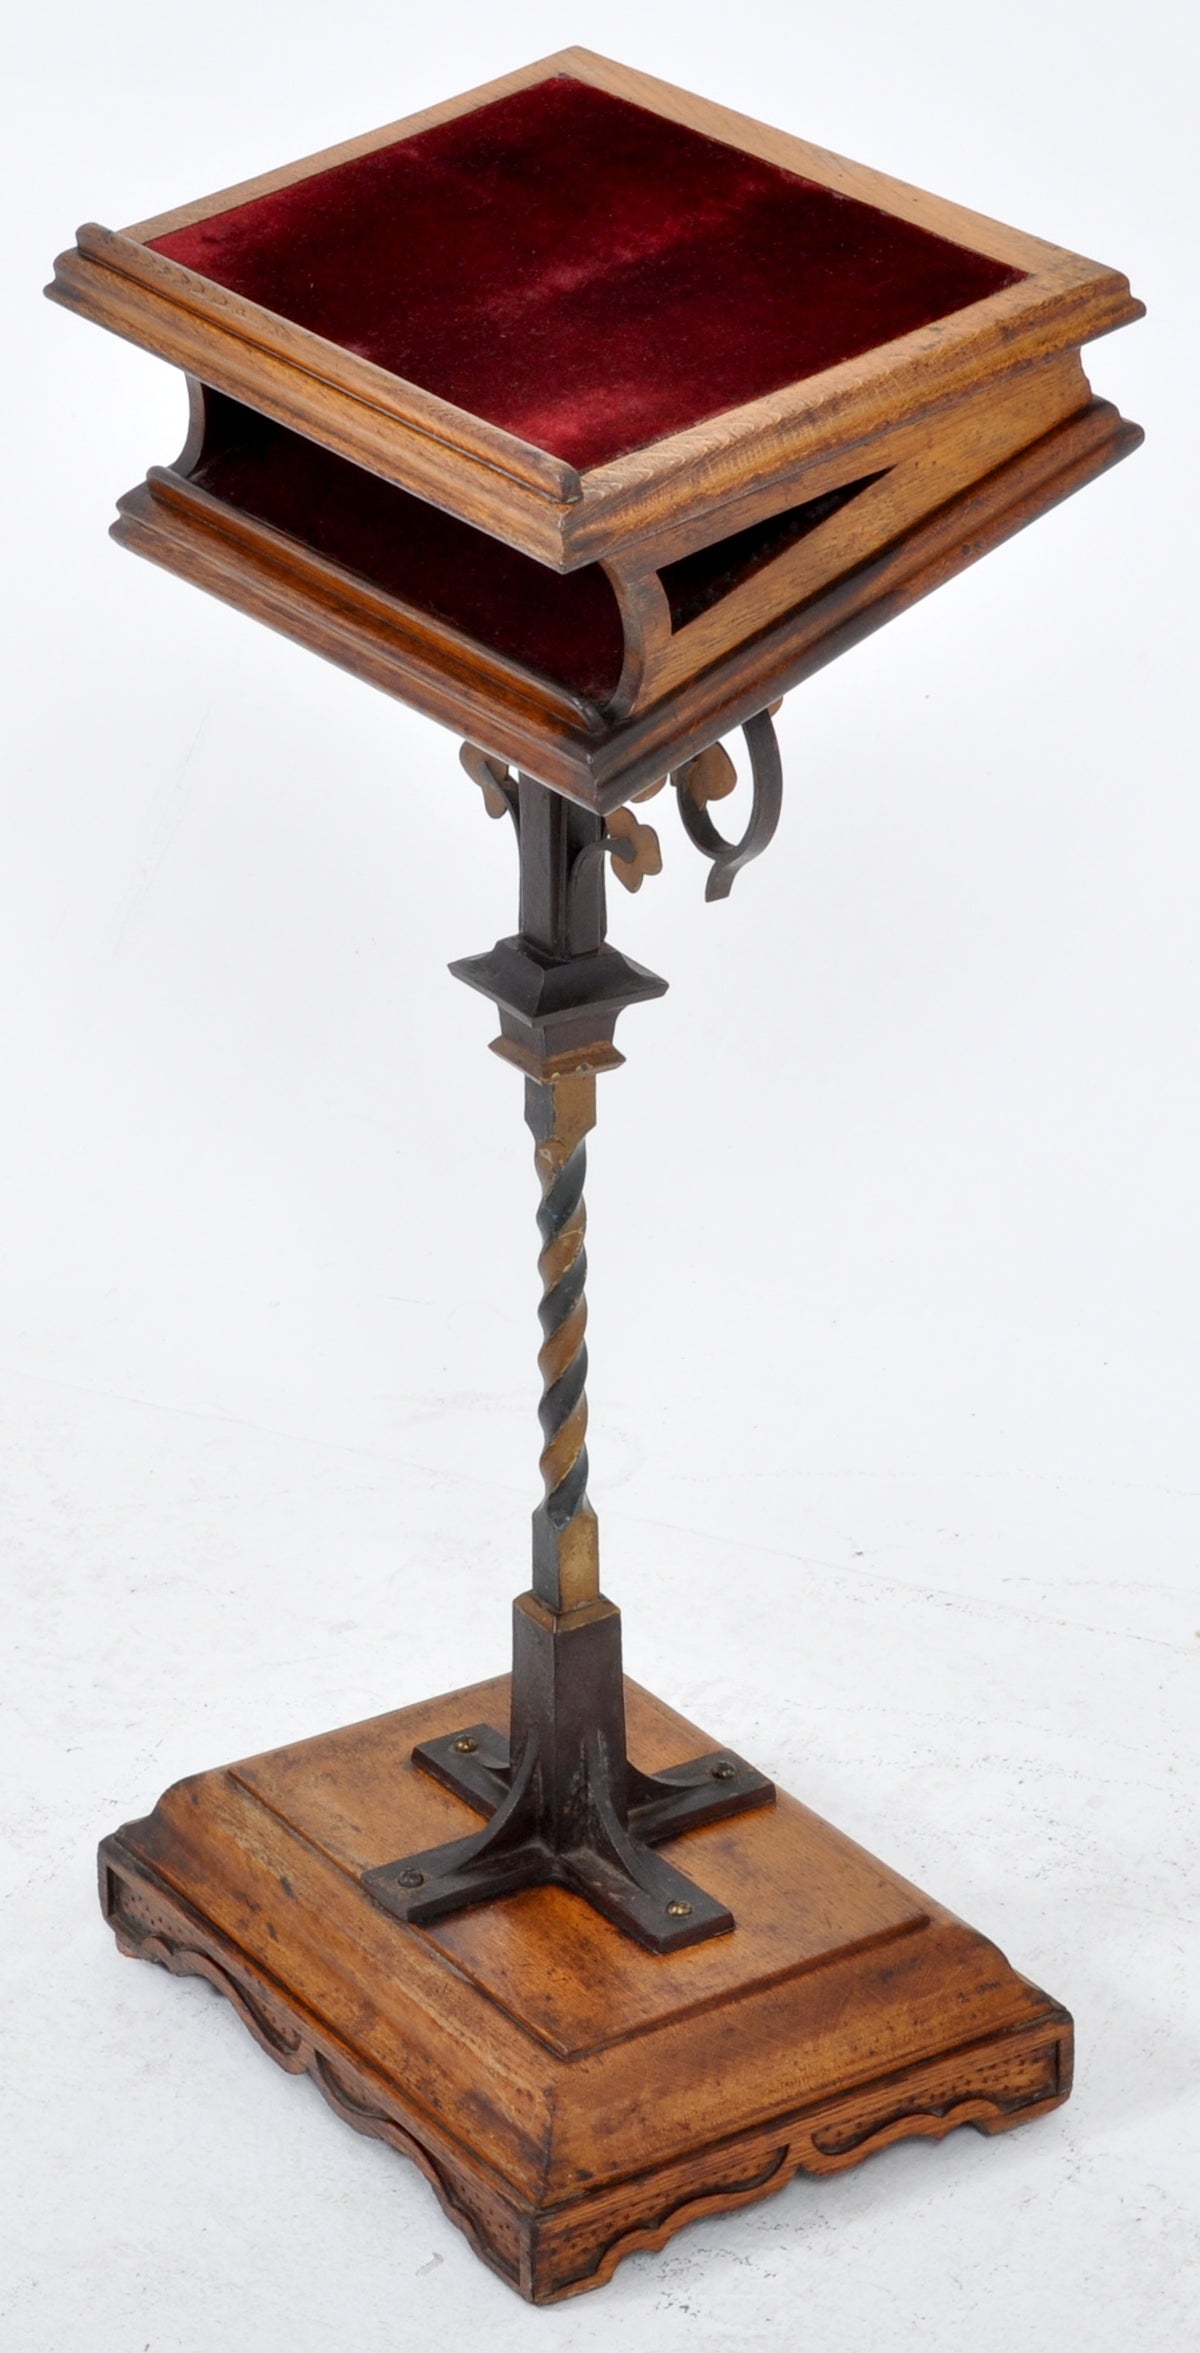 Antique English Oak and Wrought Iron Arts and Crafts Lectern/Bookrest, Circa 1890